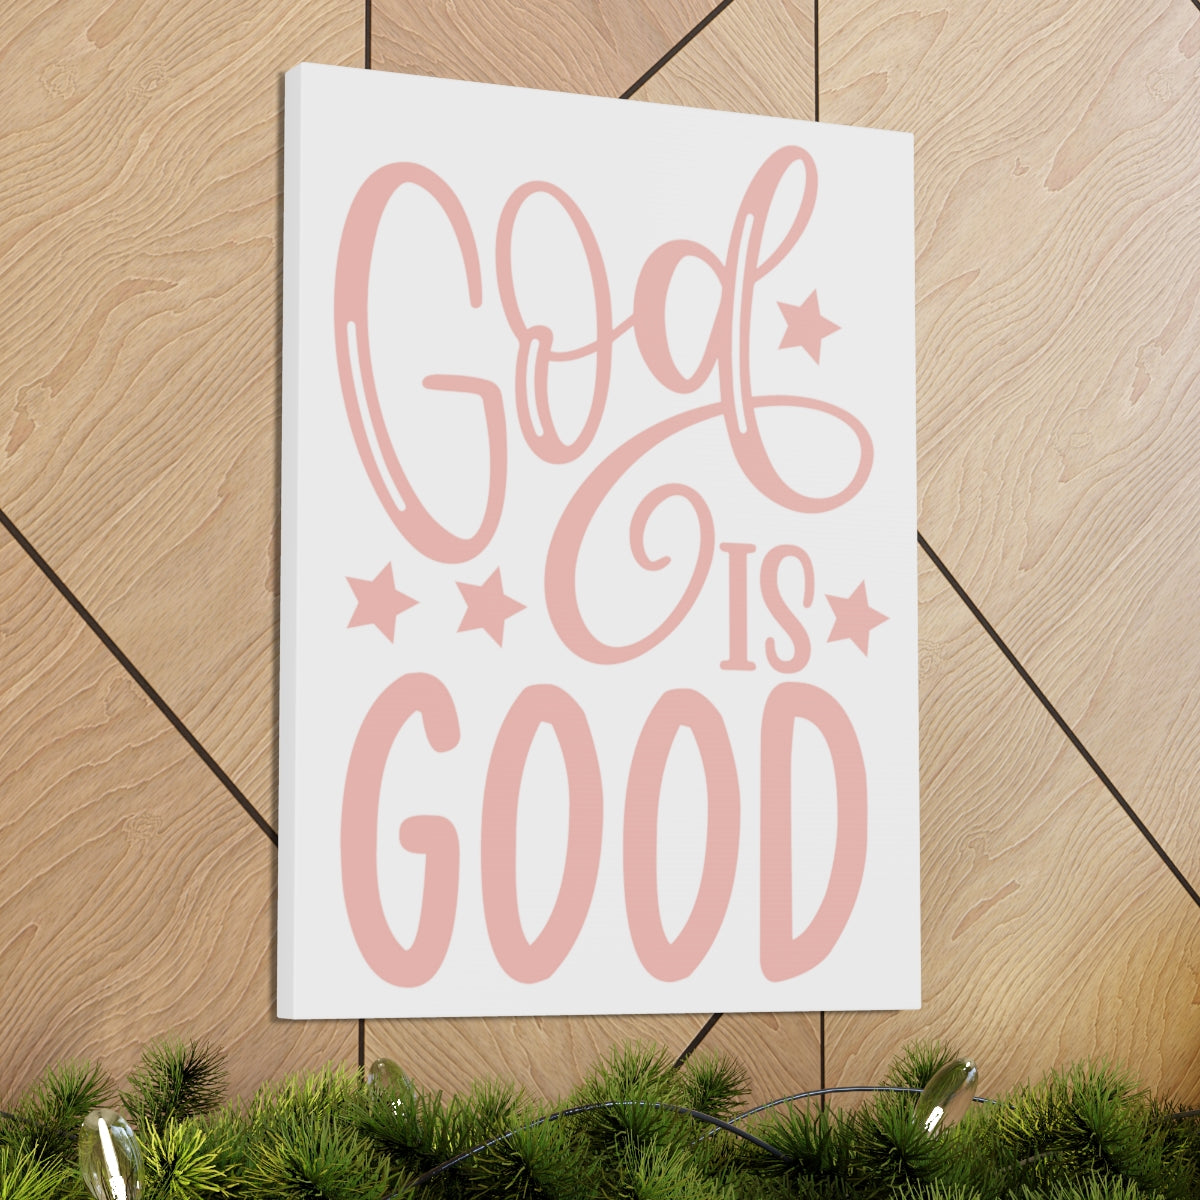 Scripture Walls God Is Good Psalm 107:1 Christian Wall Art Print Ready to Hang Unframed-Express Your Love Gifts